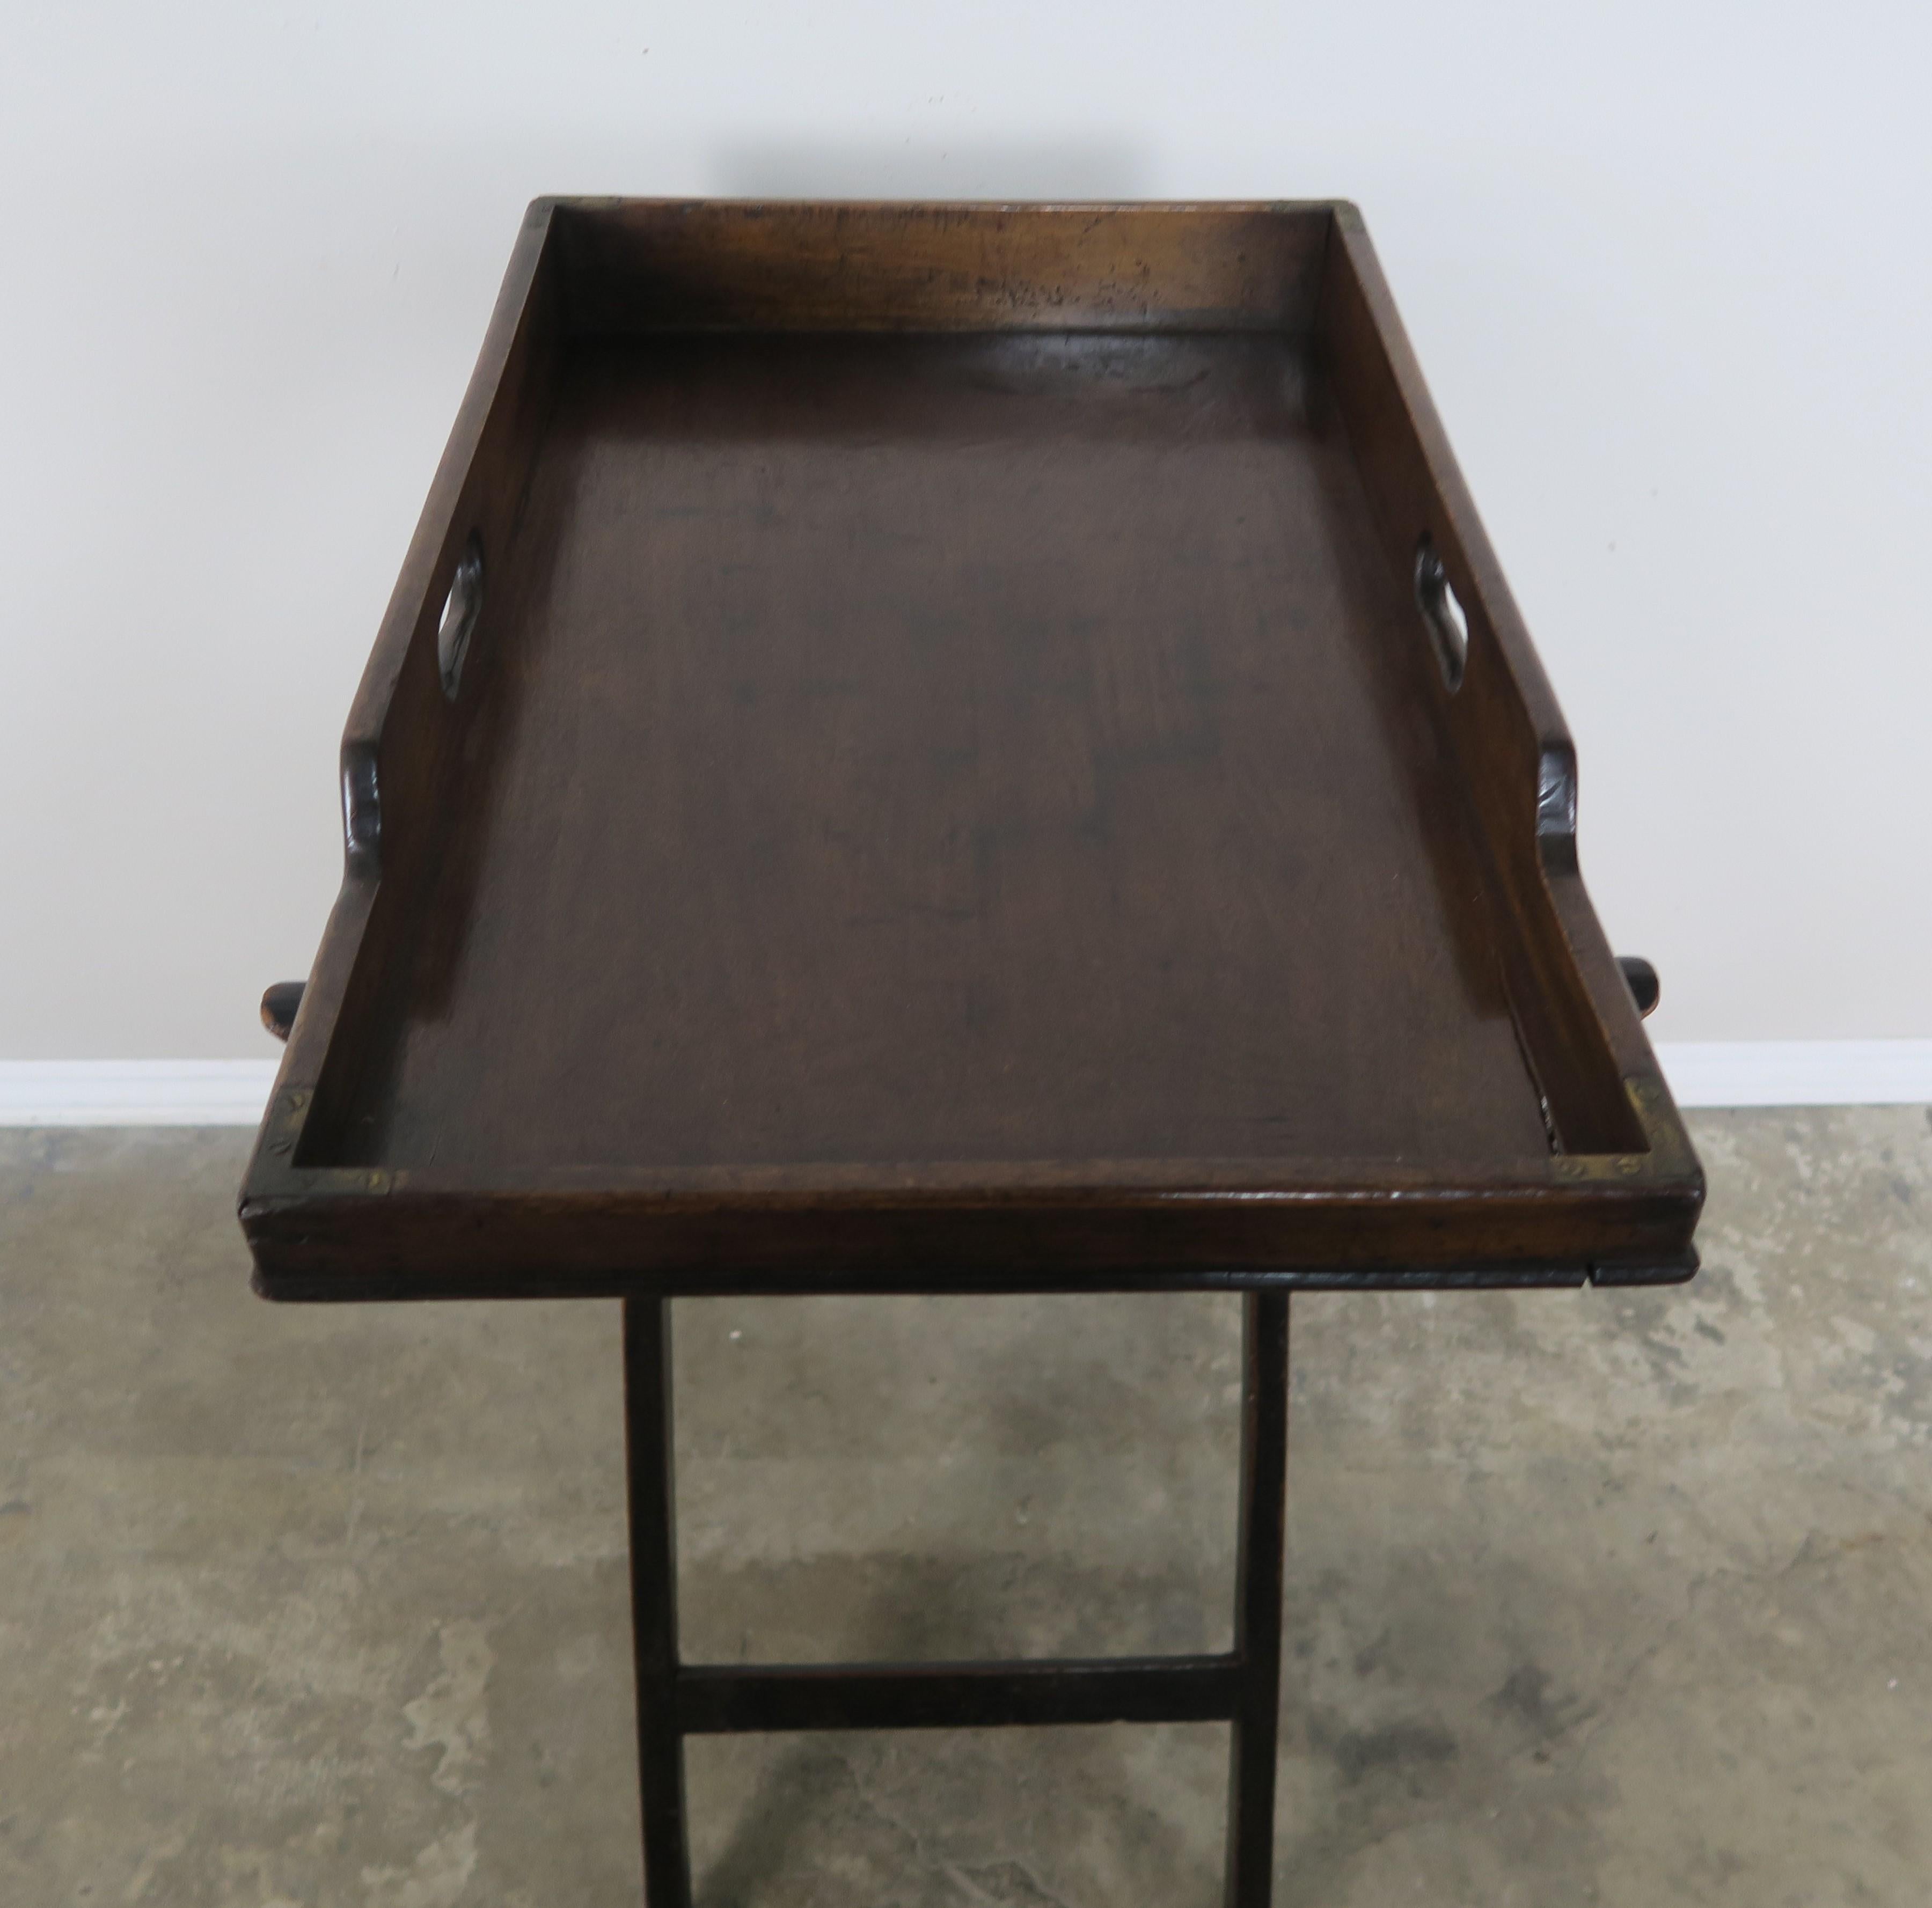 English Mahogany Butler's Tray with Stand, circa 1900s (Englisch)